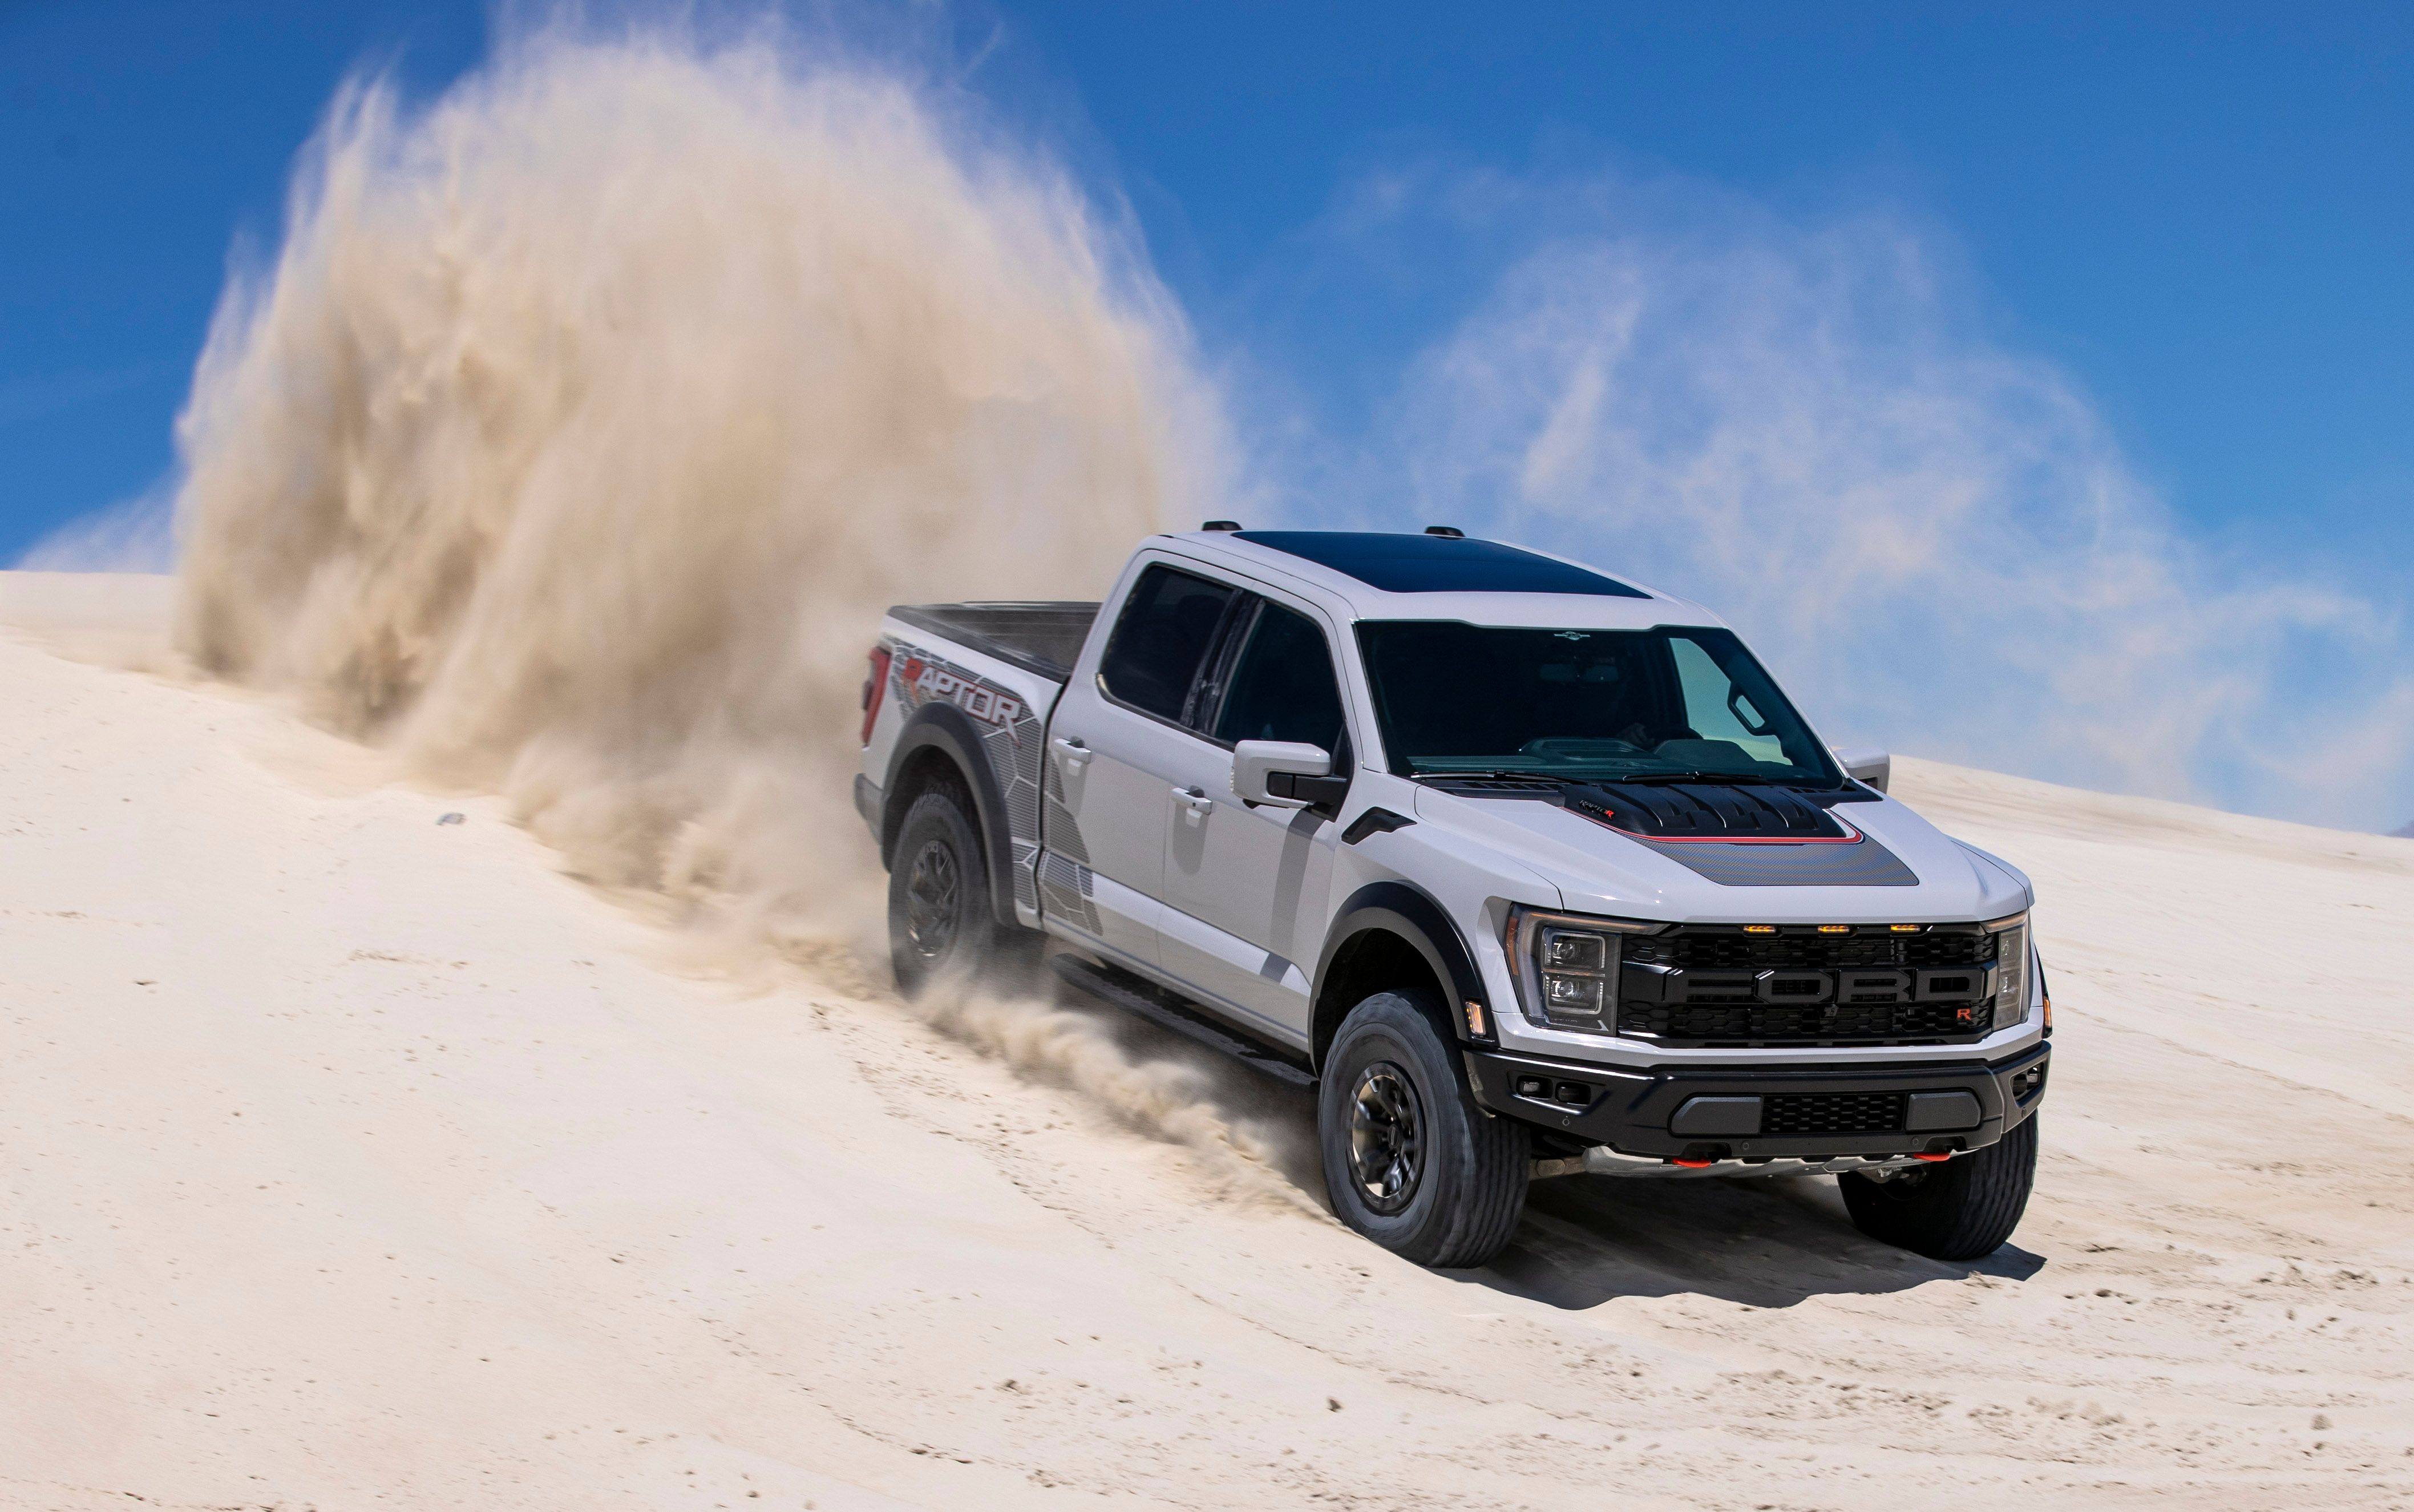 Fords Entire Raptor Lineup Ranked